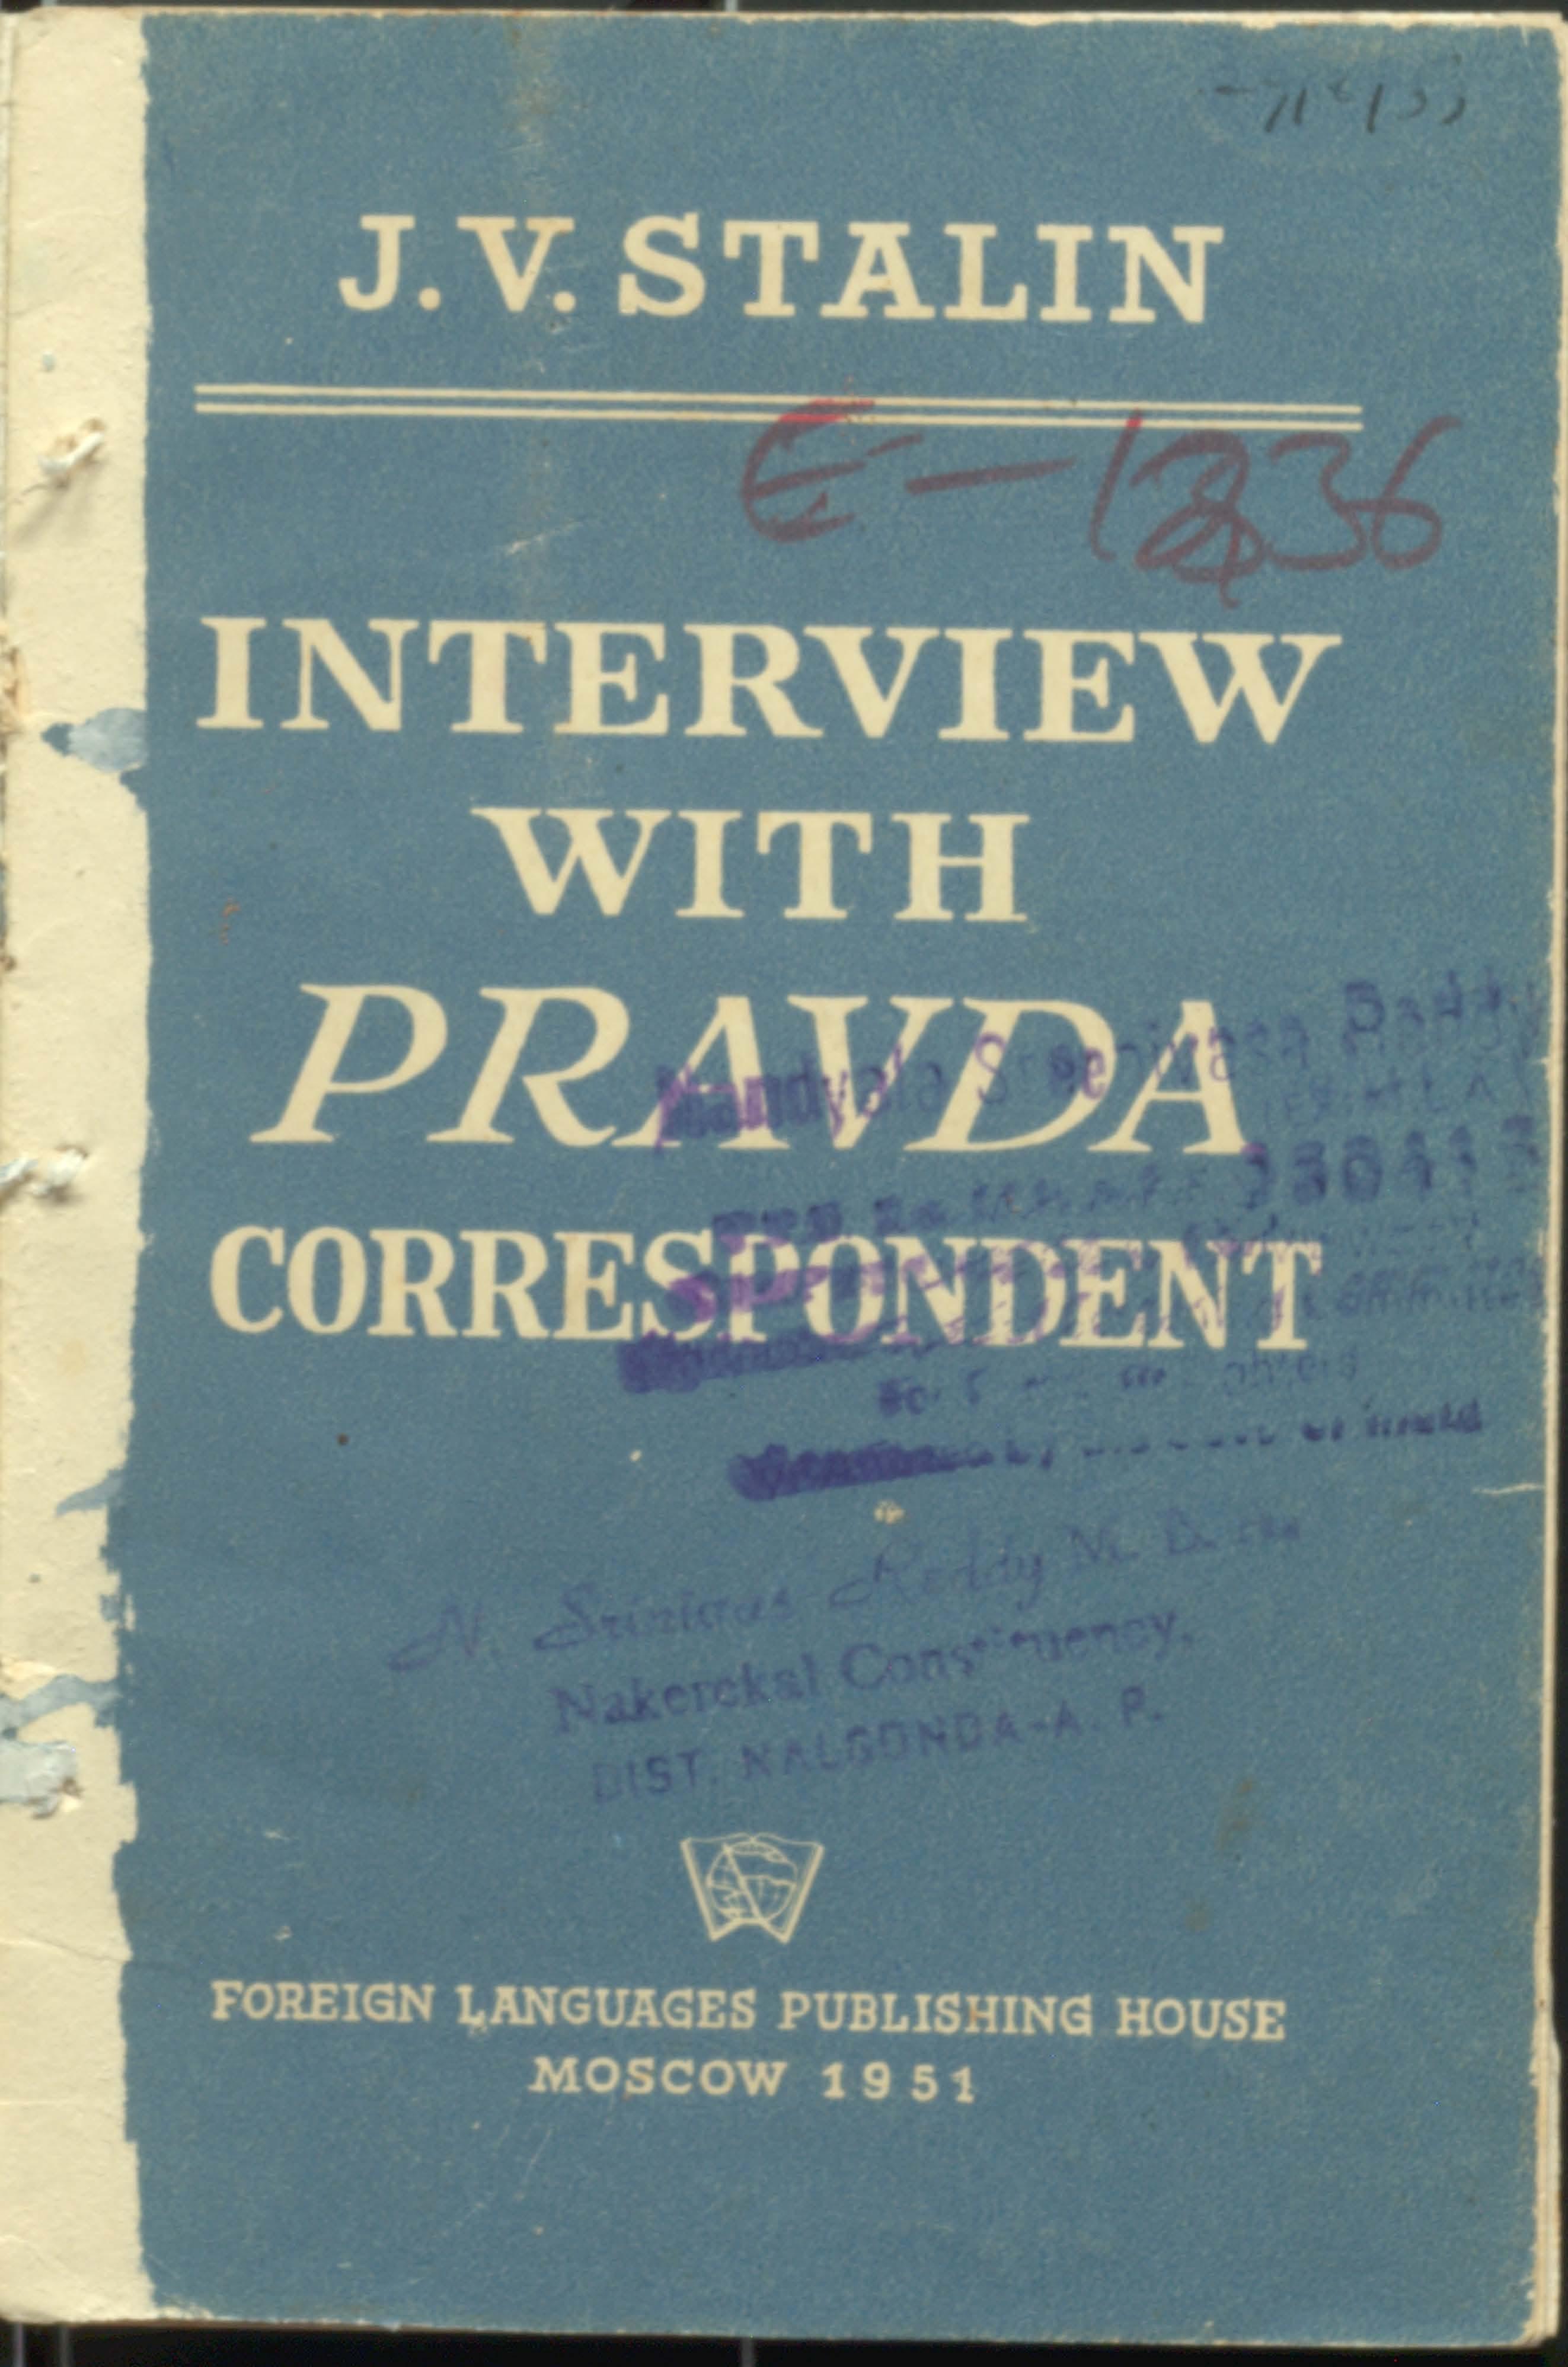 Interview With PRAVDA Correspodent